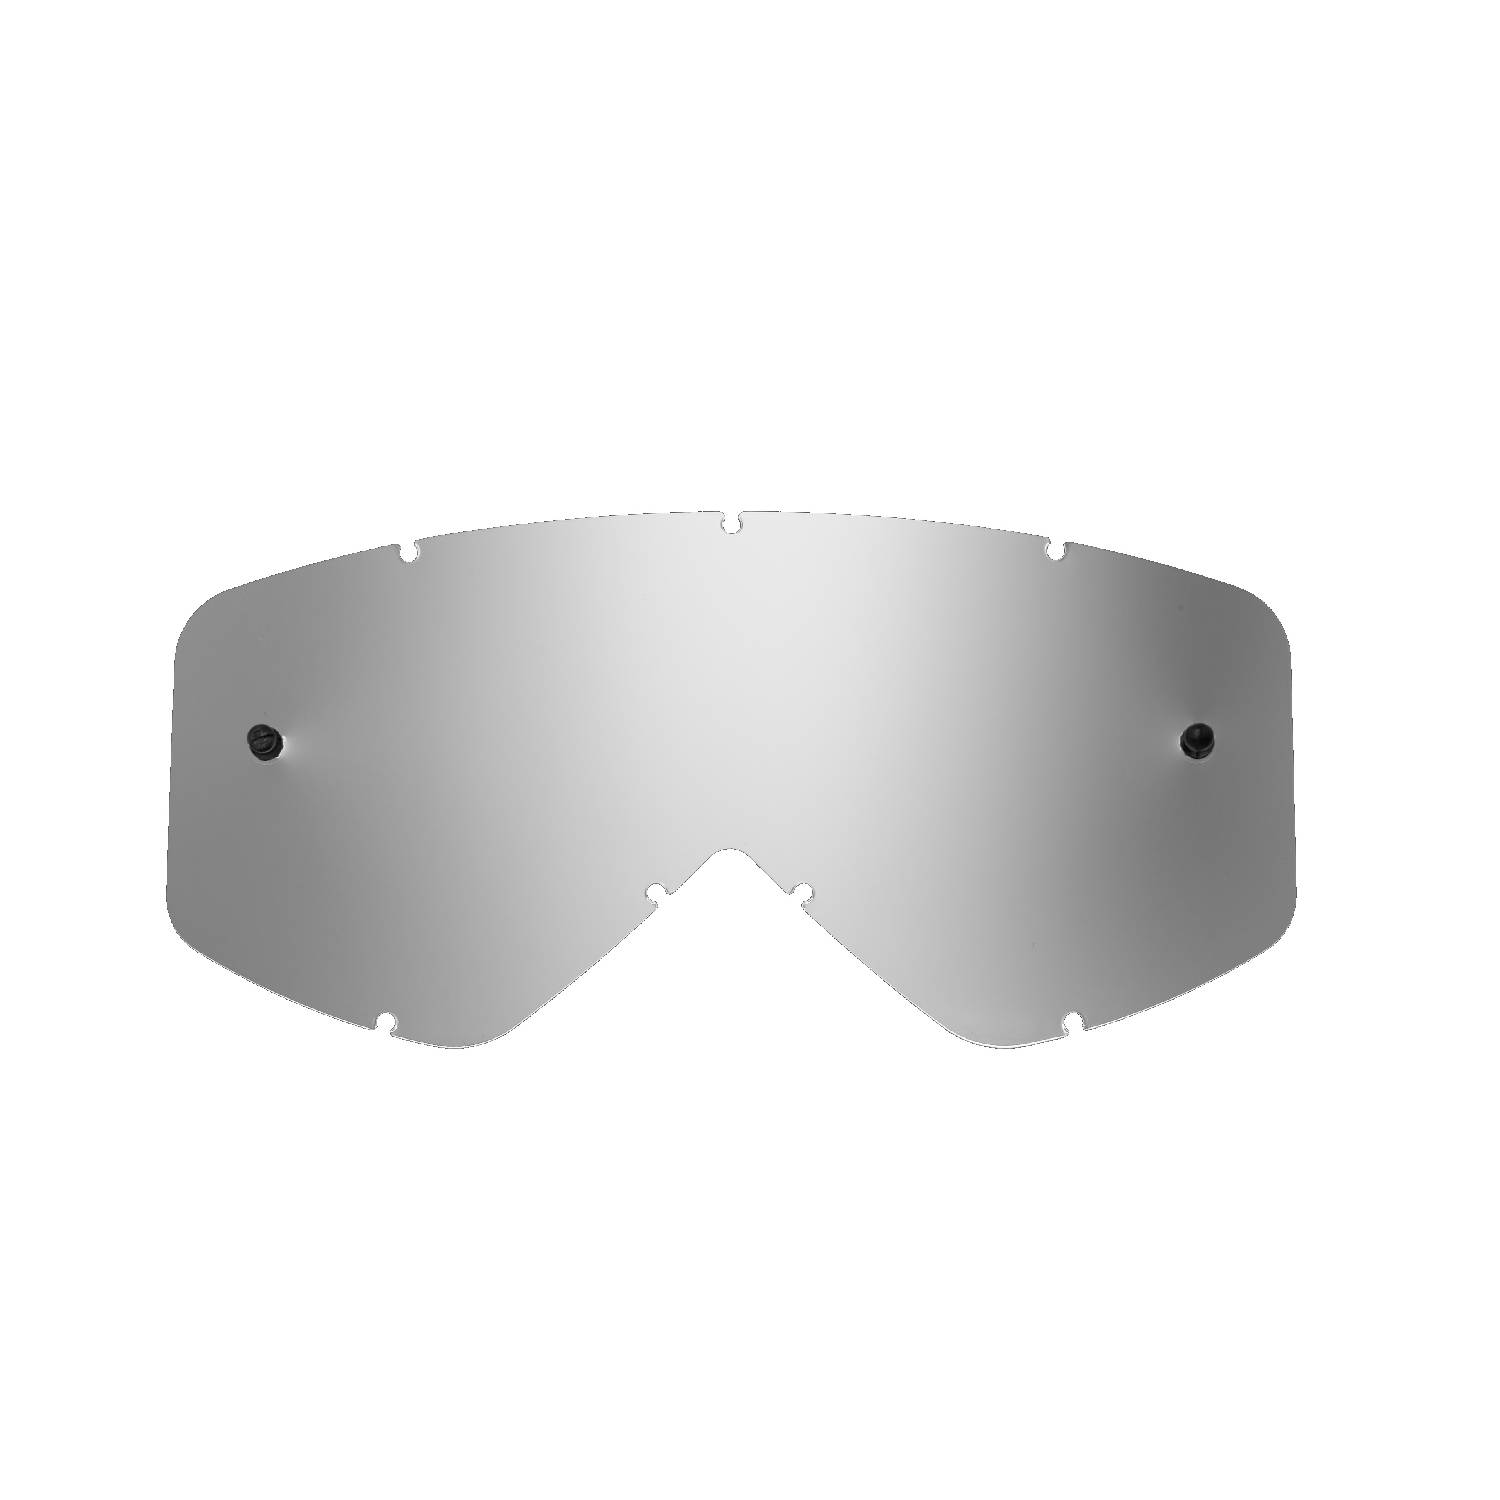 silver-toned mirrored replacement lenses for goggles compatible for Smith Fuel / Intake / V1 / V2 goggle